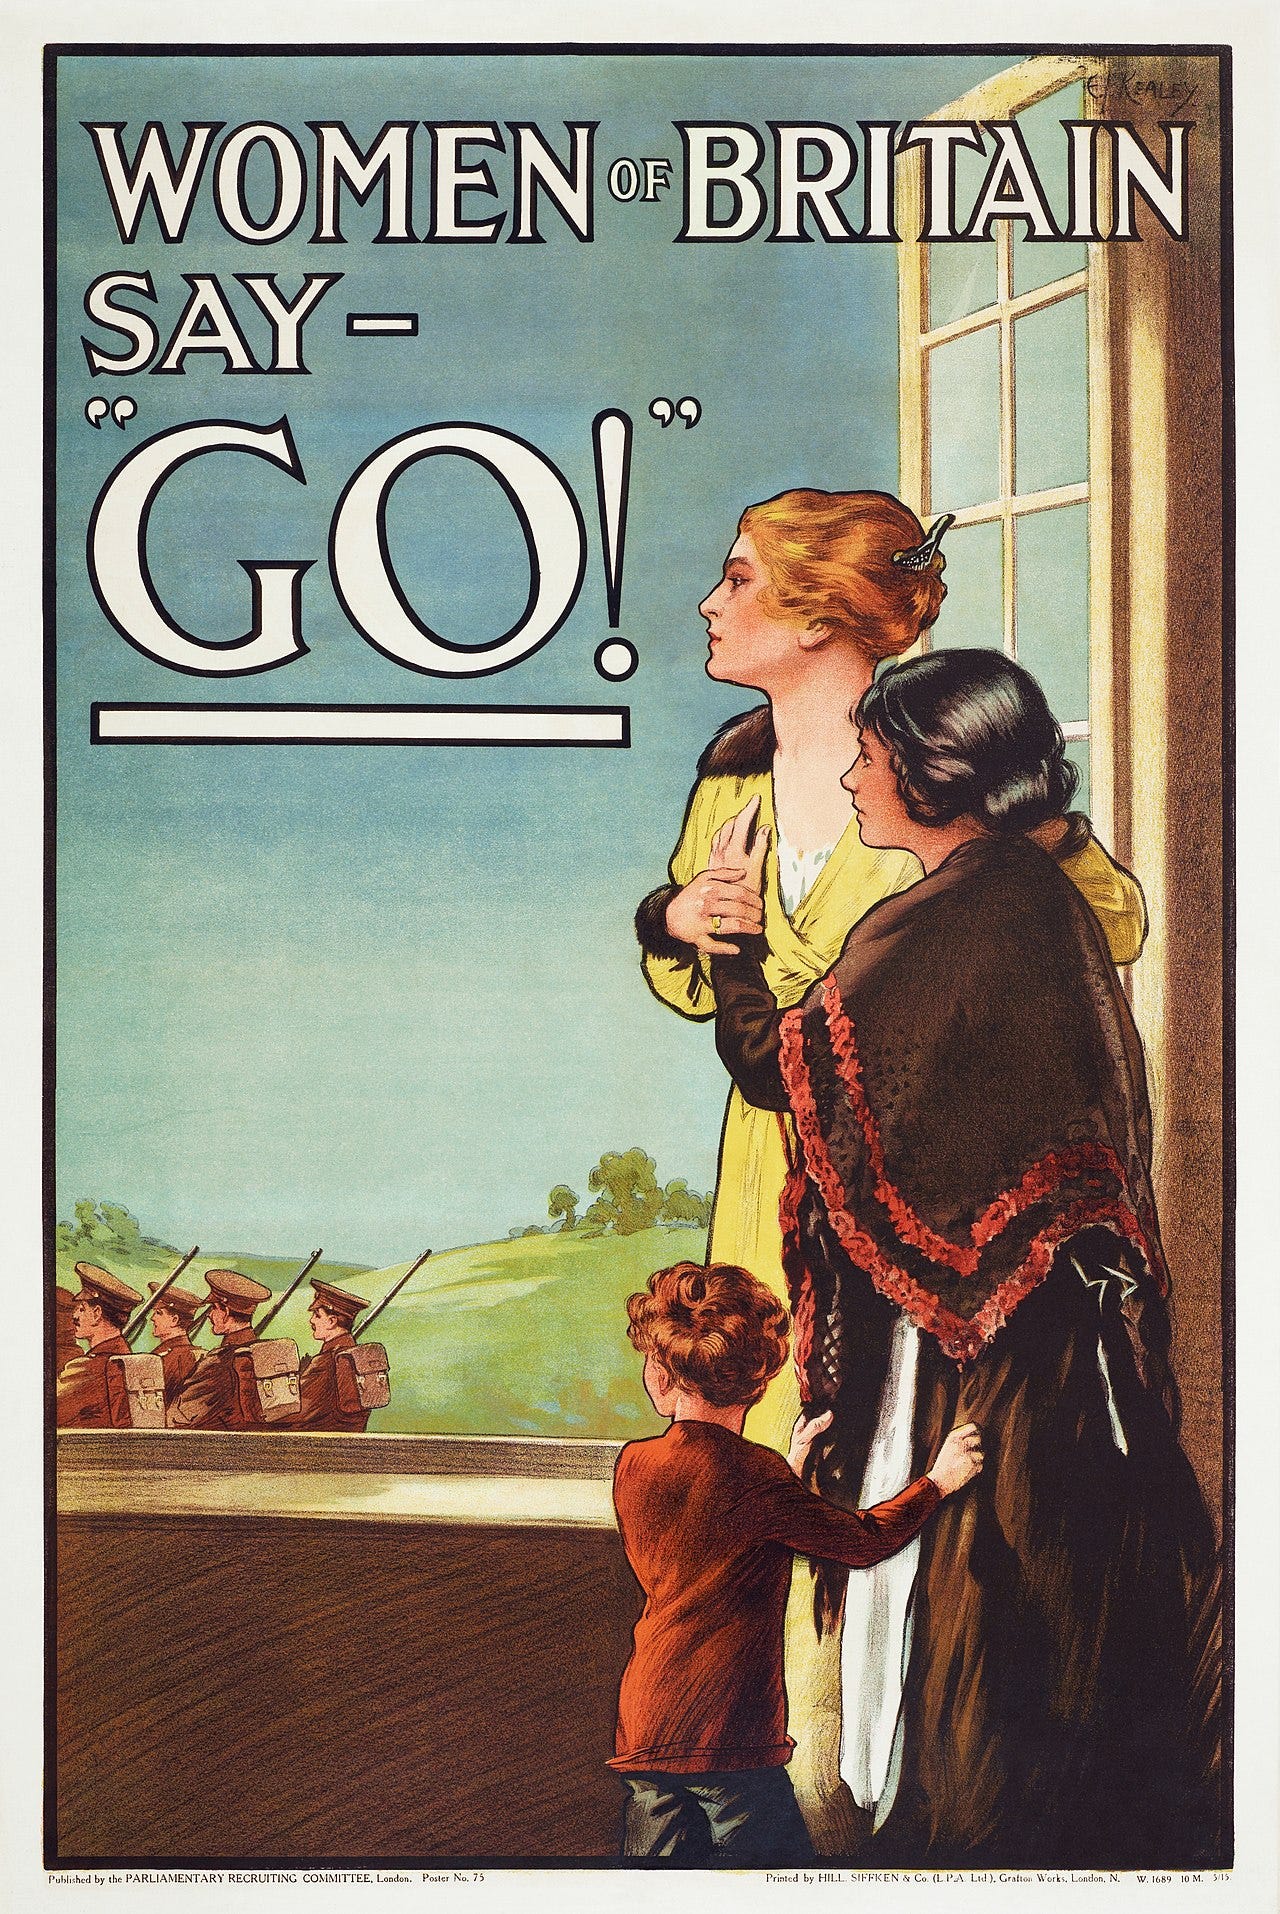 Poster of two women and a young boy looking out of an open window at soldiers in a countryside setting. The text "Women of Britain Say 'Go!'" is in white across the top of poster.